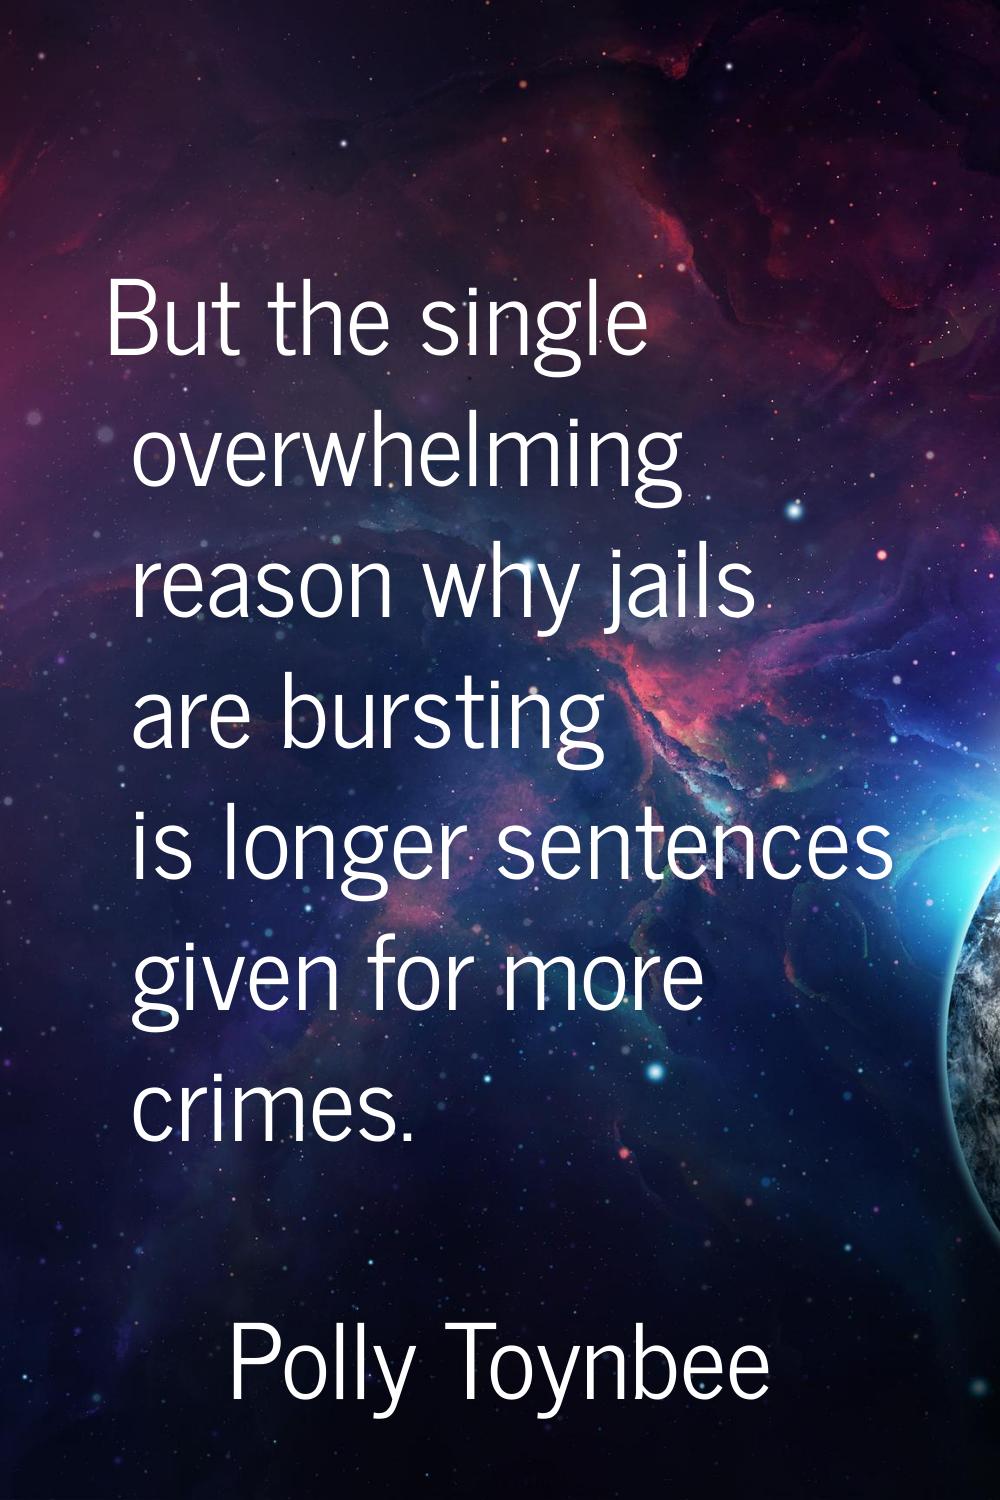 But the single overwhelming reason why jails are bursting is longer sentences given for more crimes